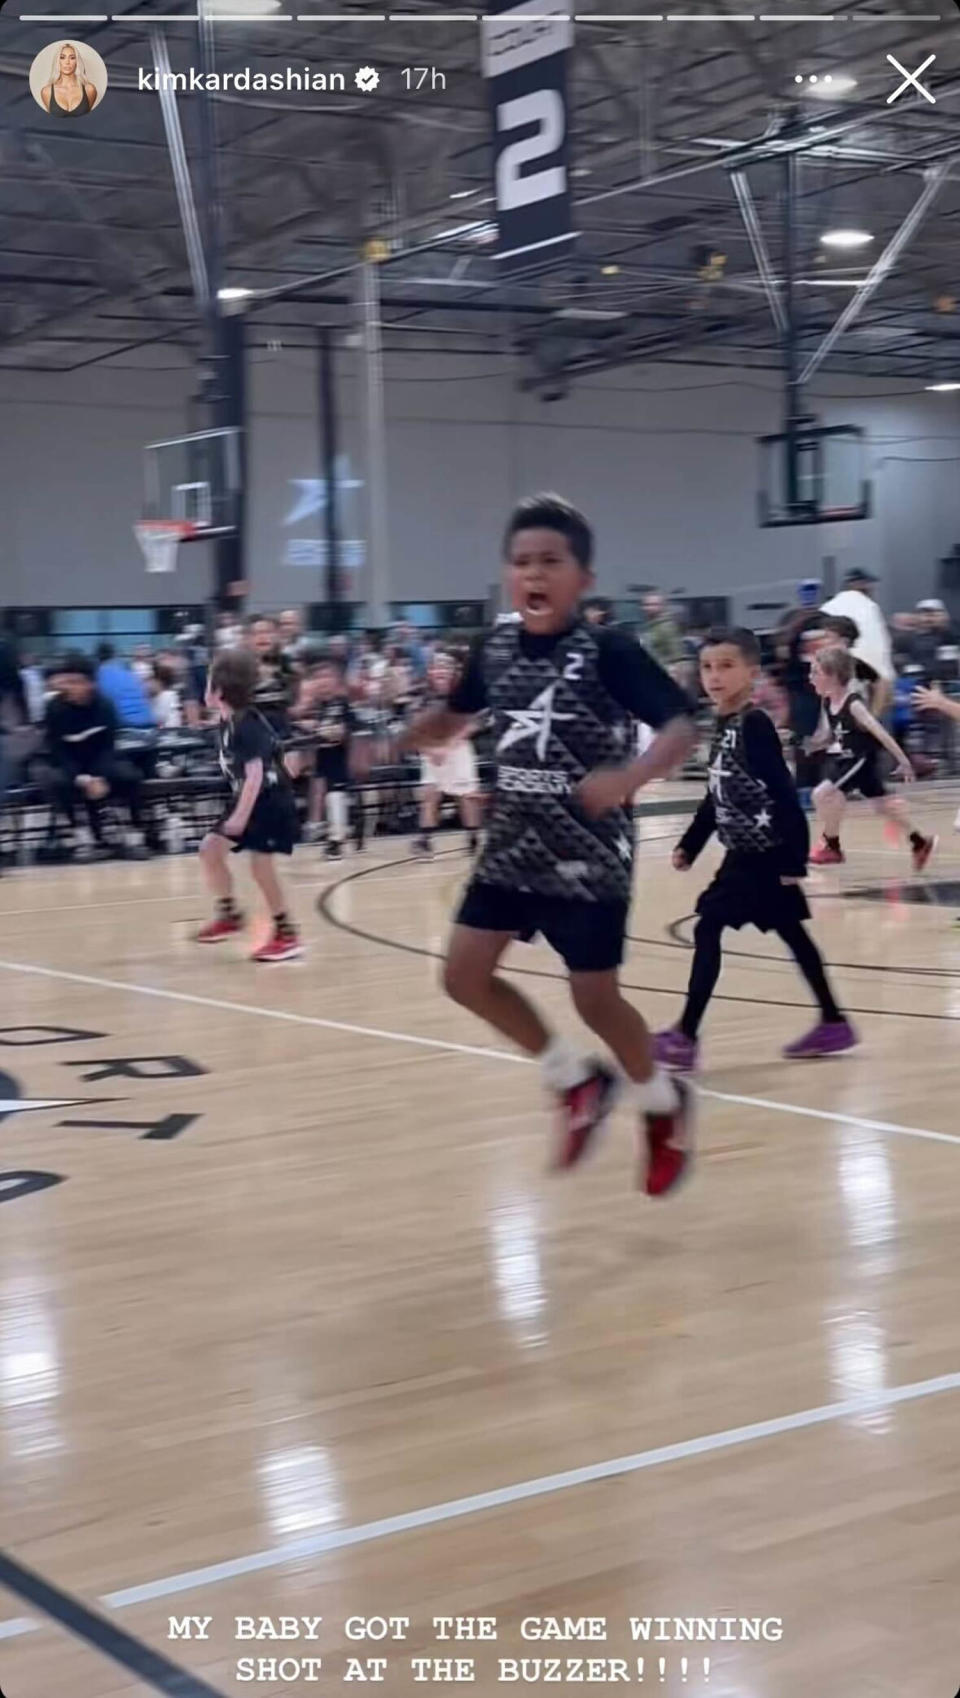 Saint West scores a shot at the buzzer to take home the win for his basketball team. (@kimkardashian on Instagram)